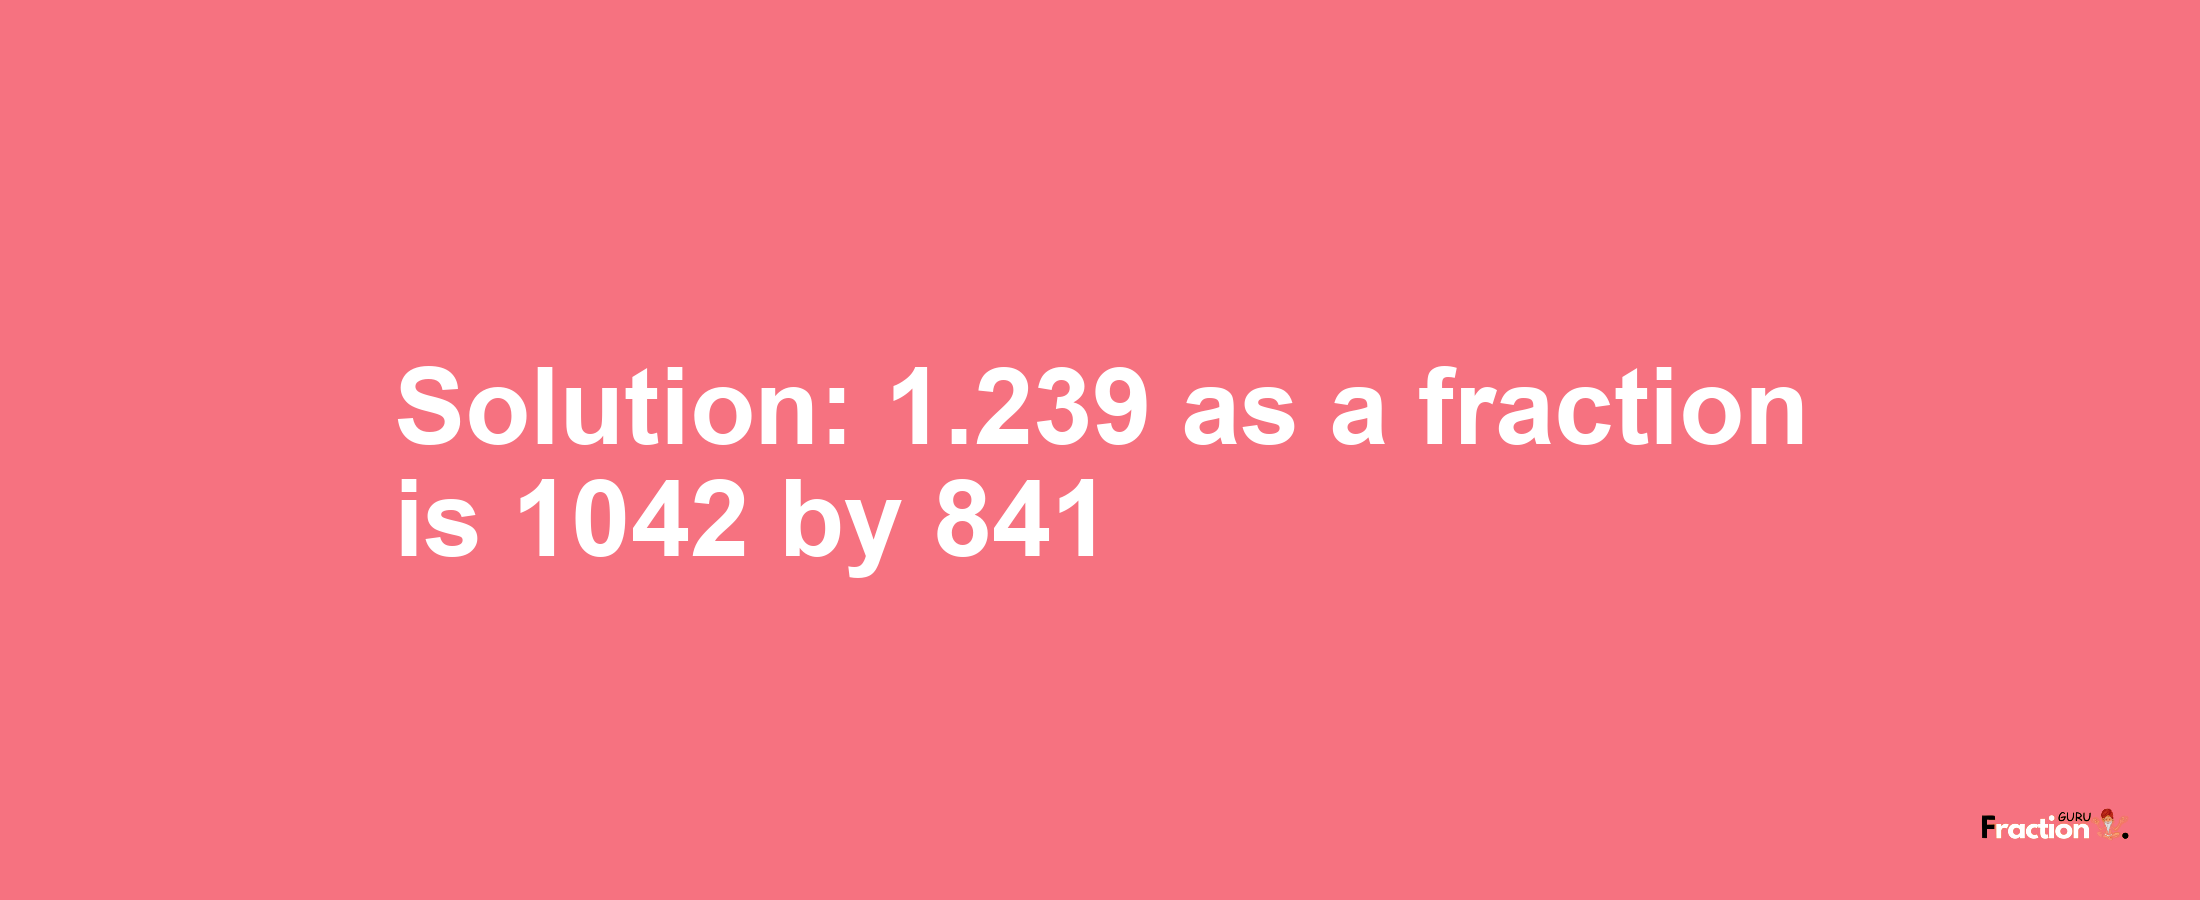 Solution:1.239 as a fraction is 1042/841